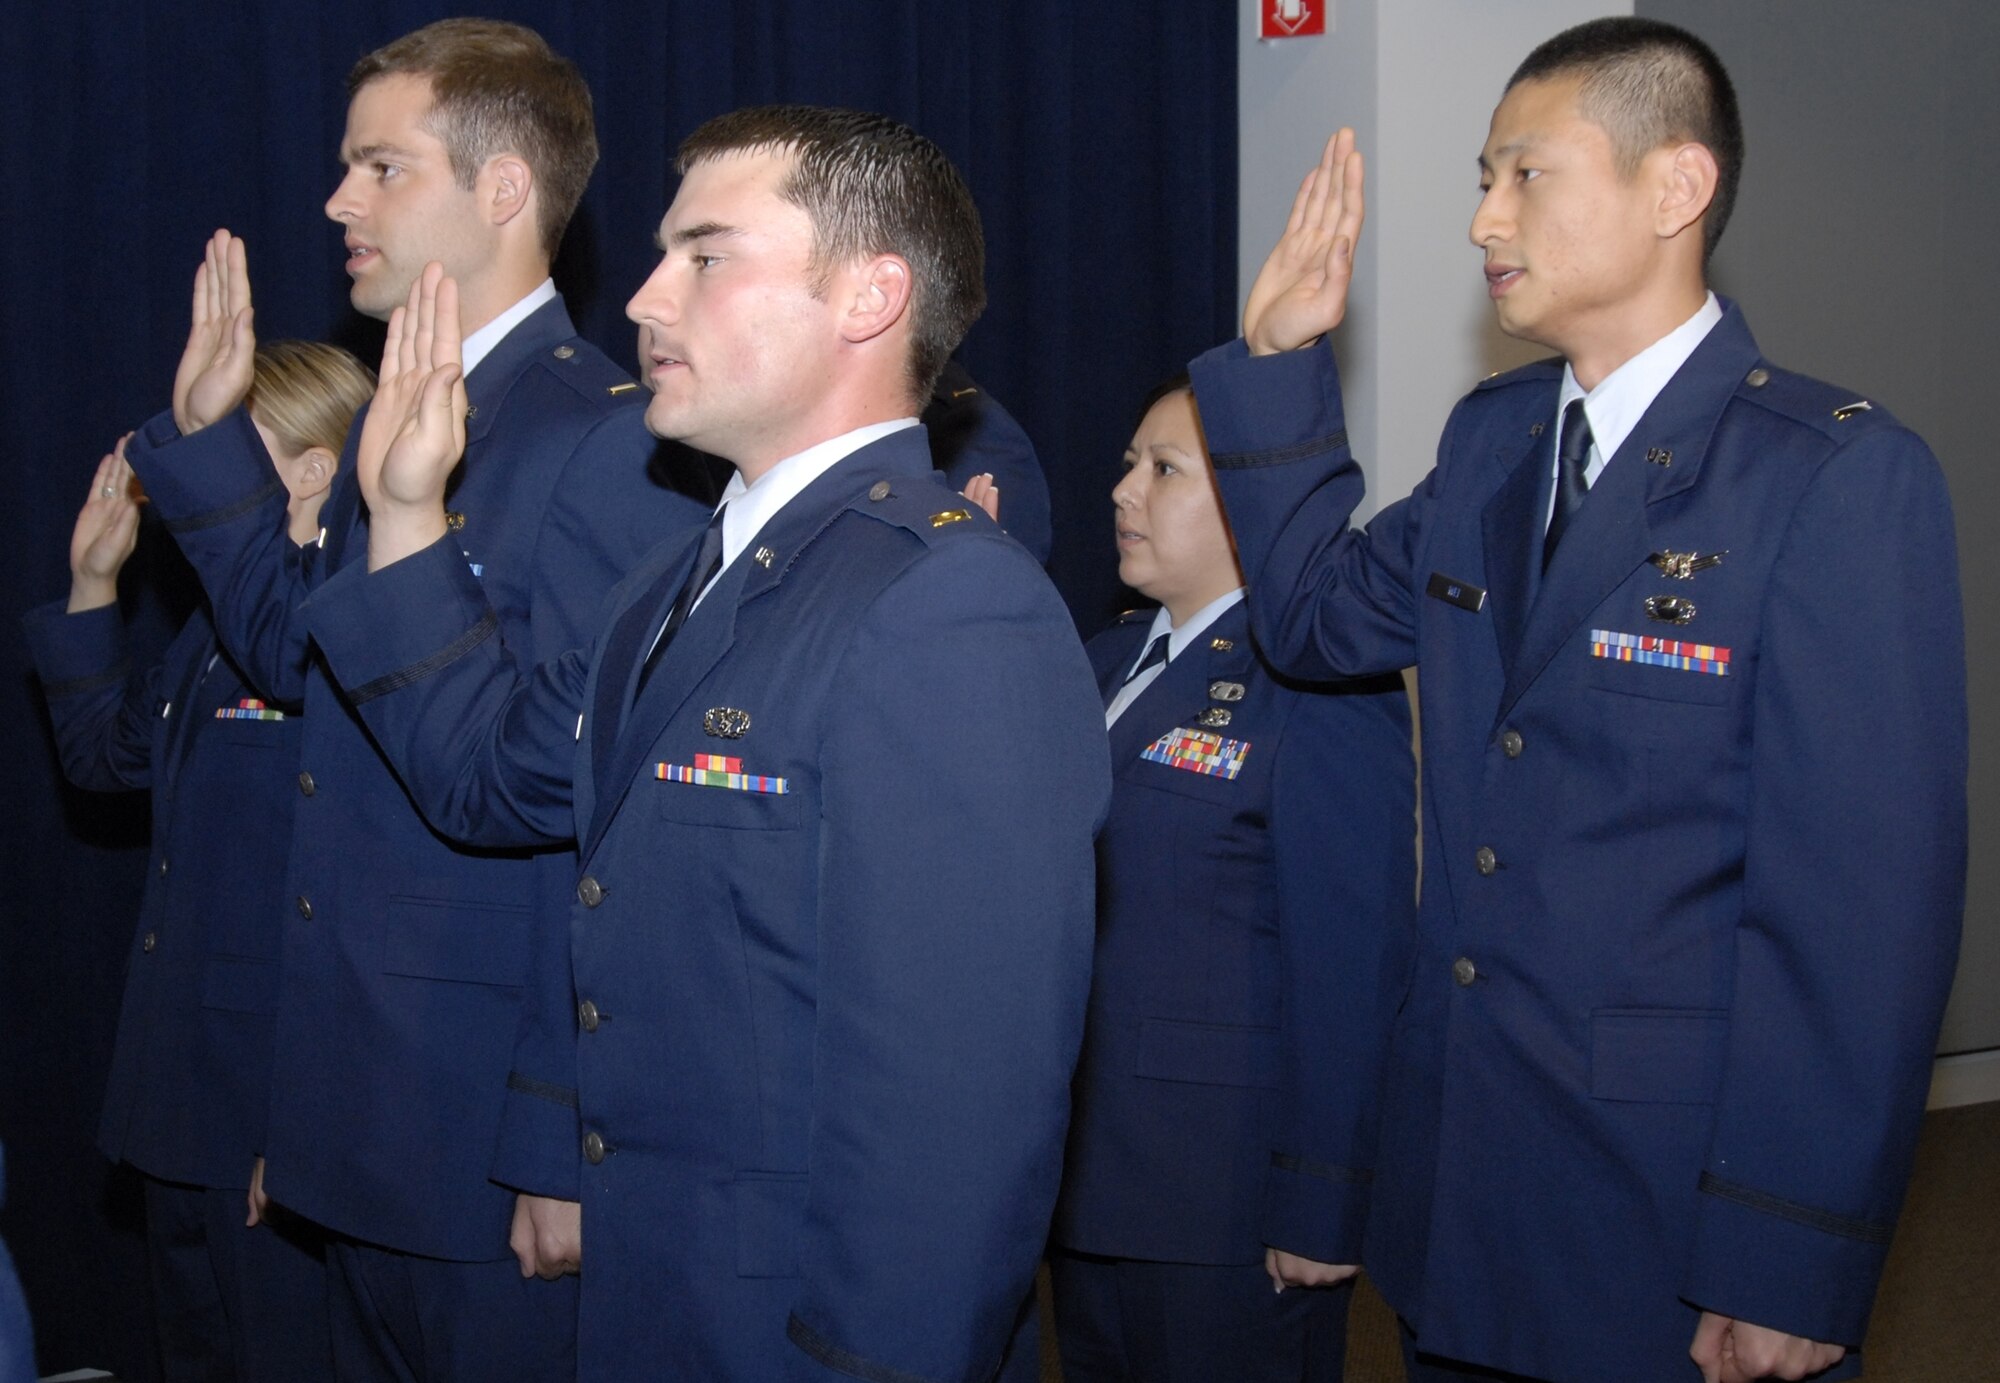 Lieutenants Paul Adams, Jonathan Walsh, Lynette Bates, and Yu Wei (left to right) receive the Oath of Office from Col. David Madden GPS wing commander, on Wednesday at the April Monthly Promotion and Recognition Ceremony. (Photo by Joe Juarez)
